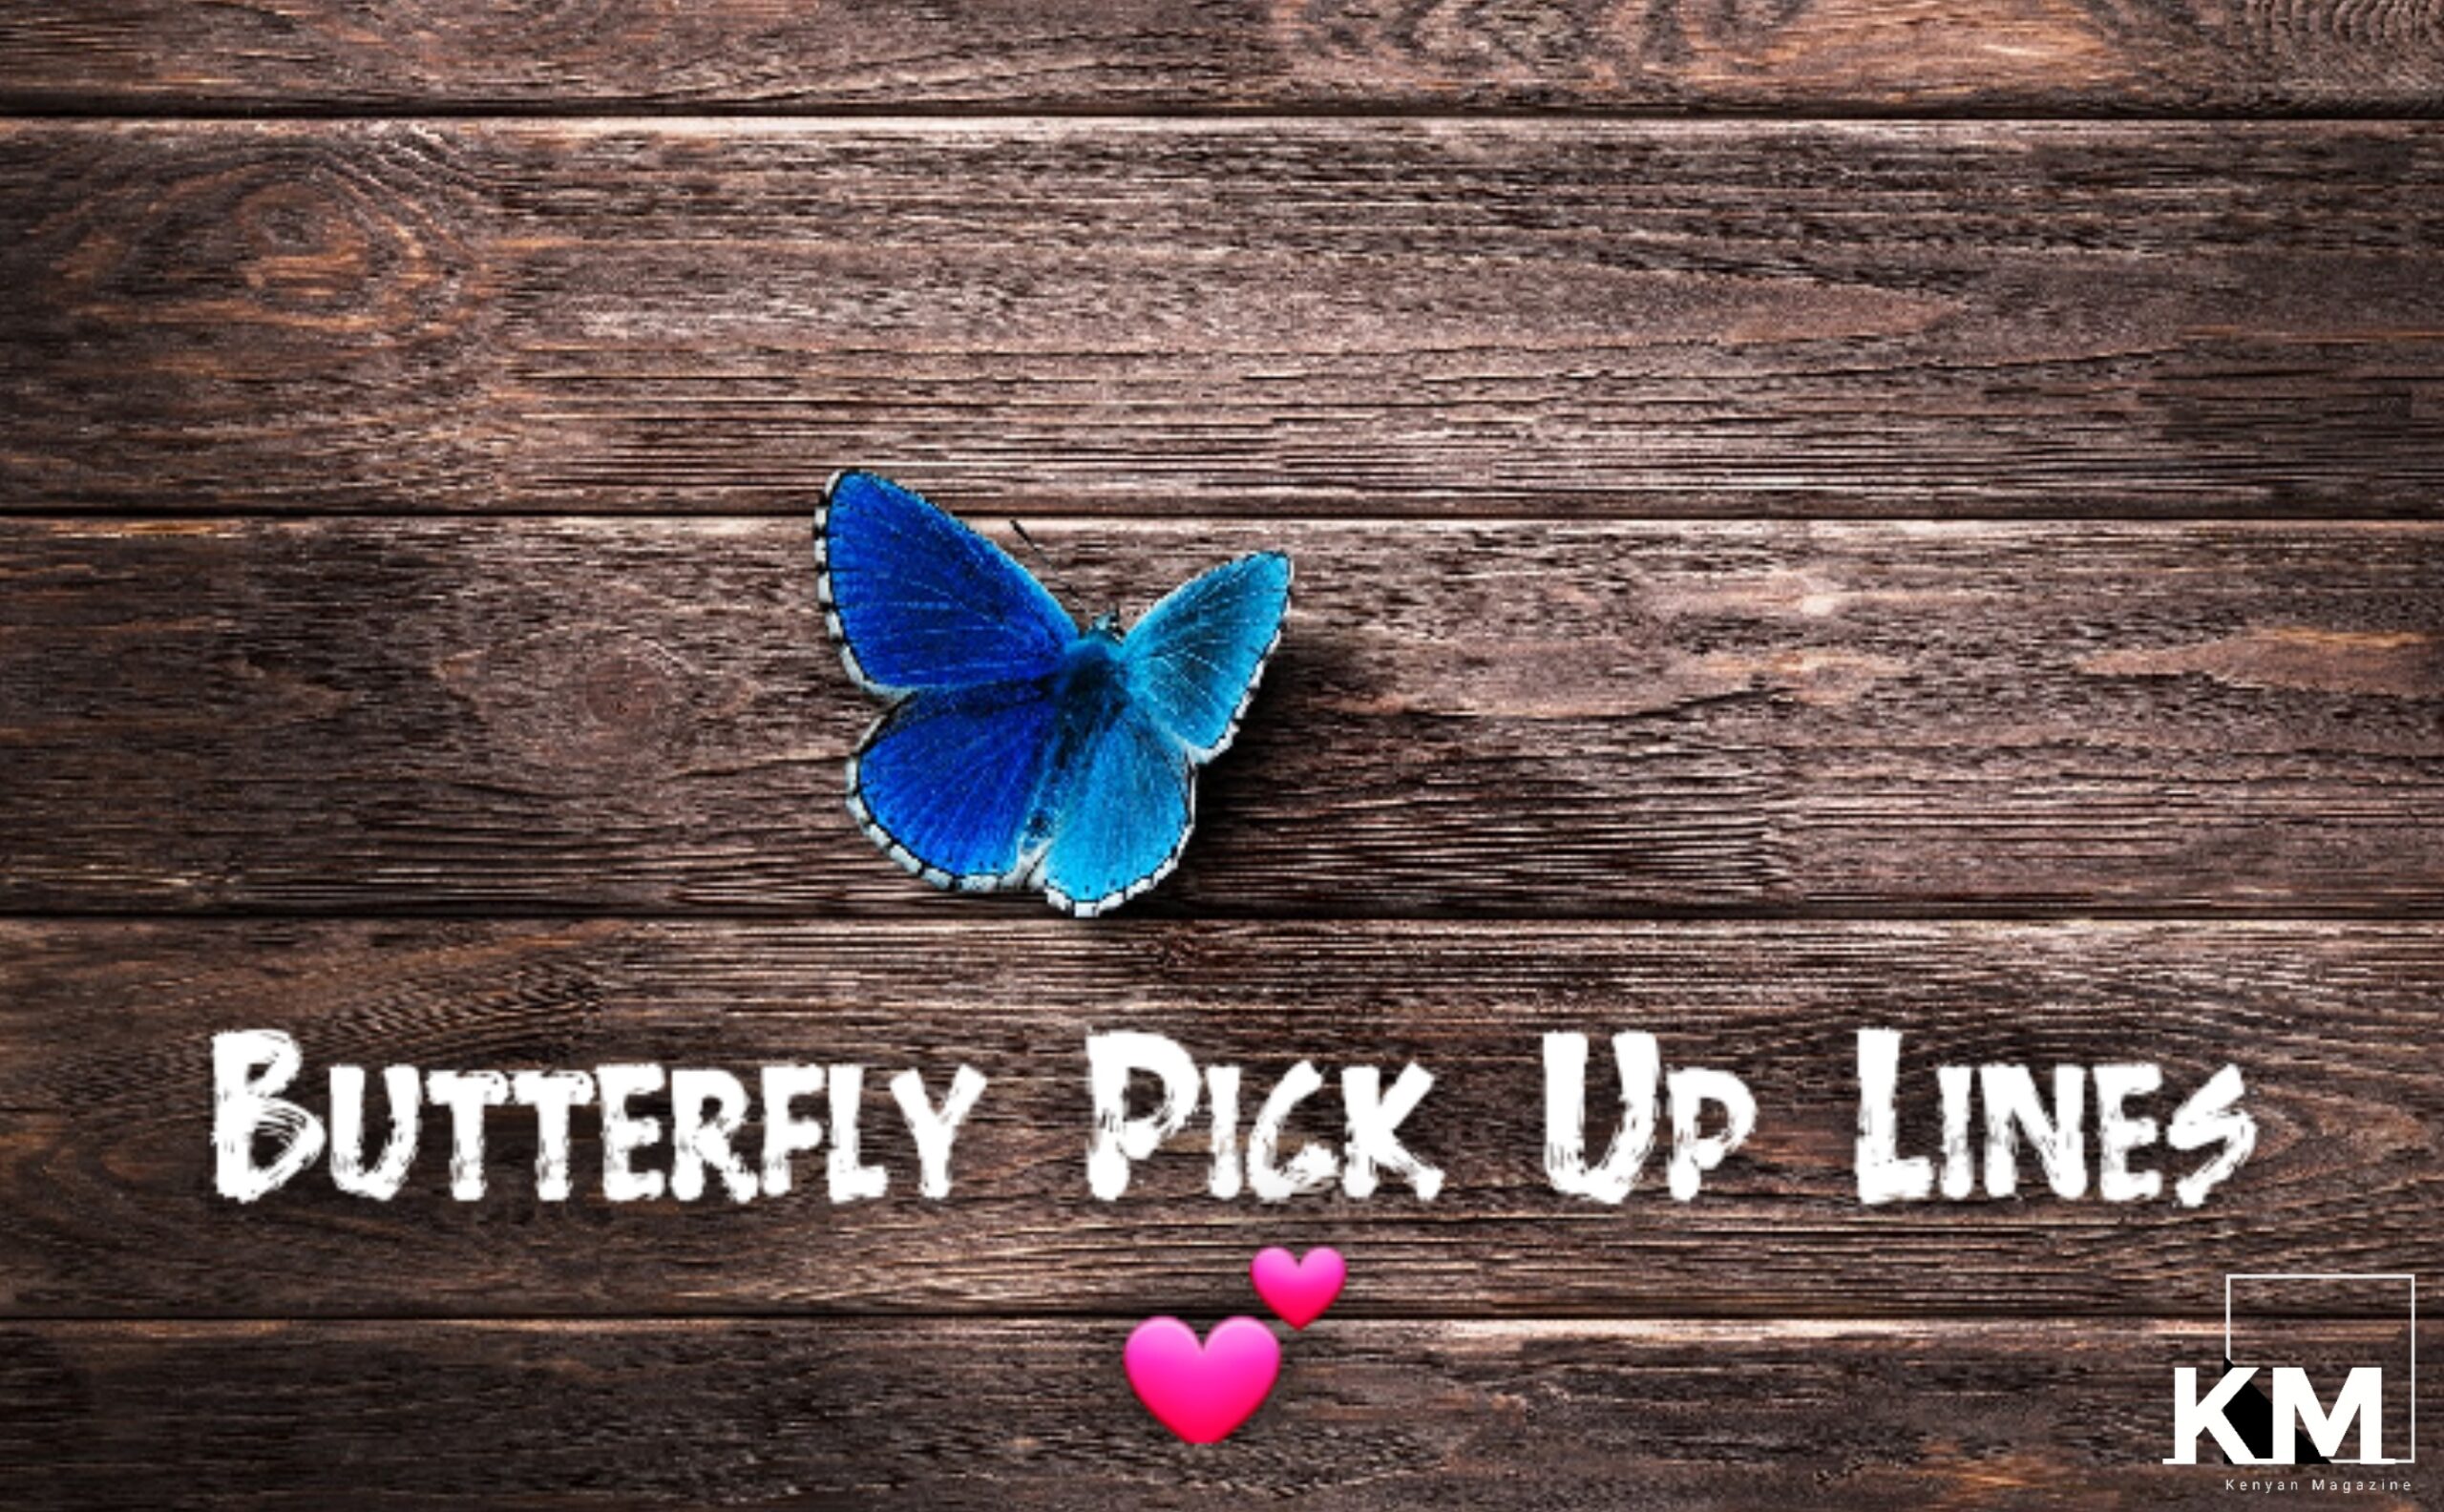 Butterfly pick up lines